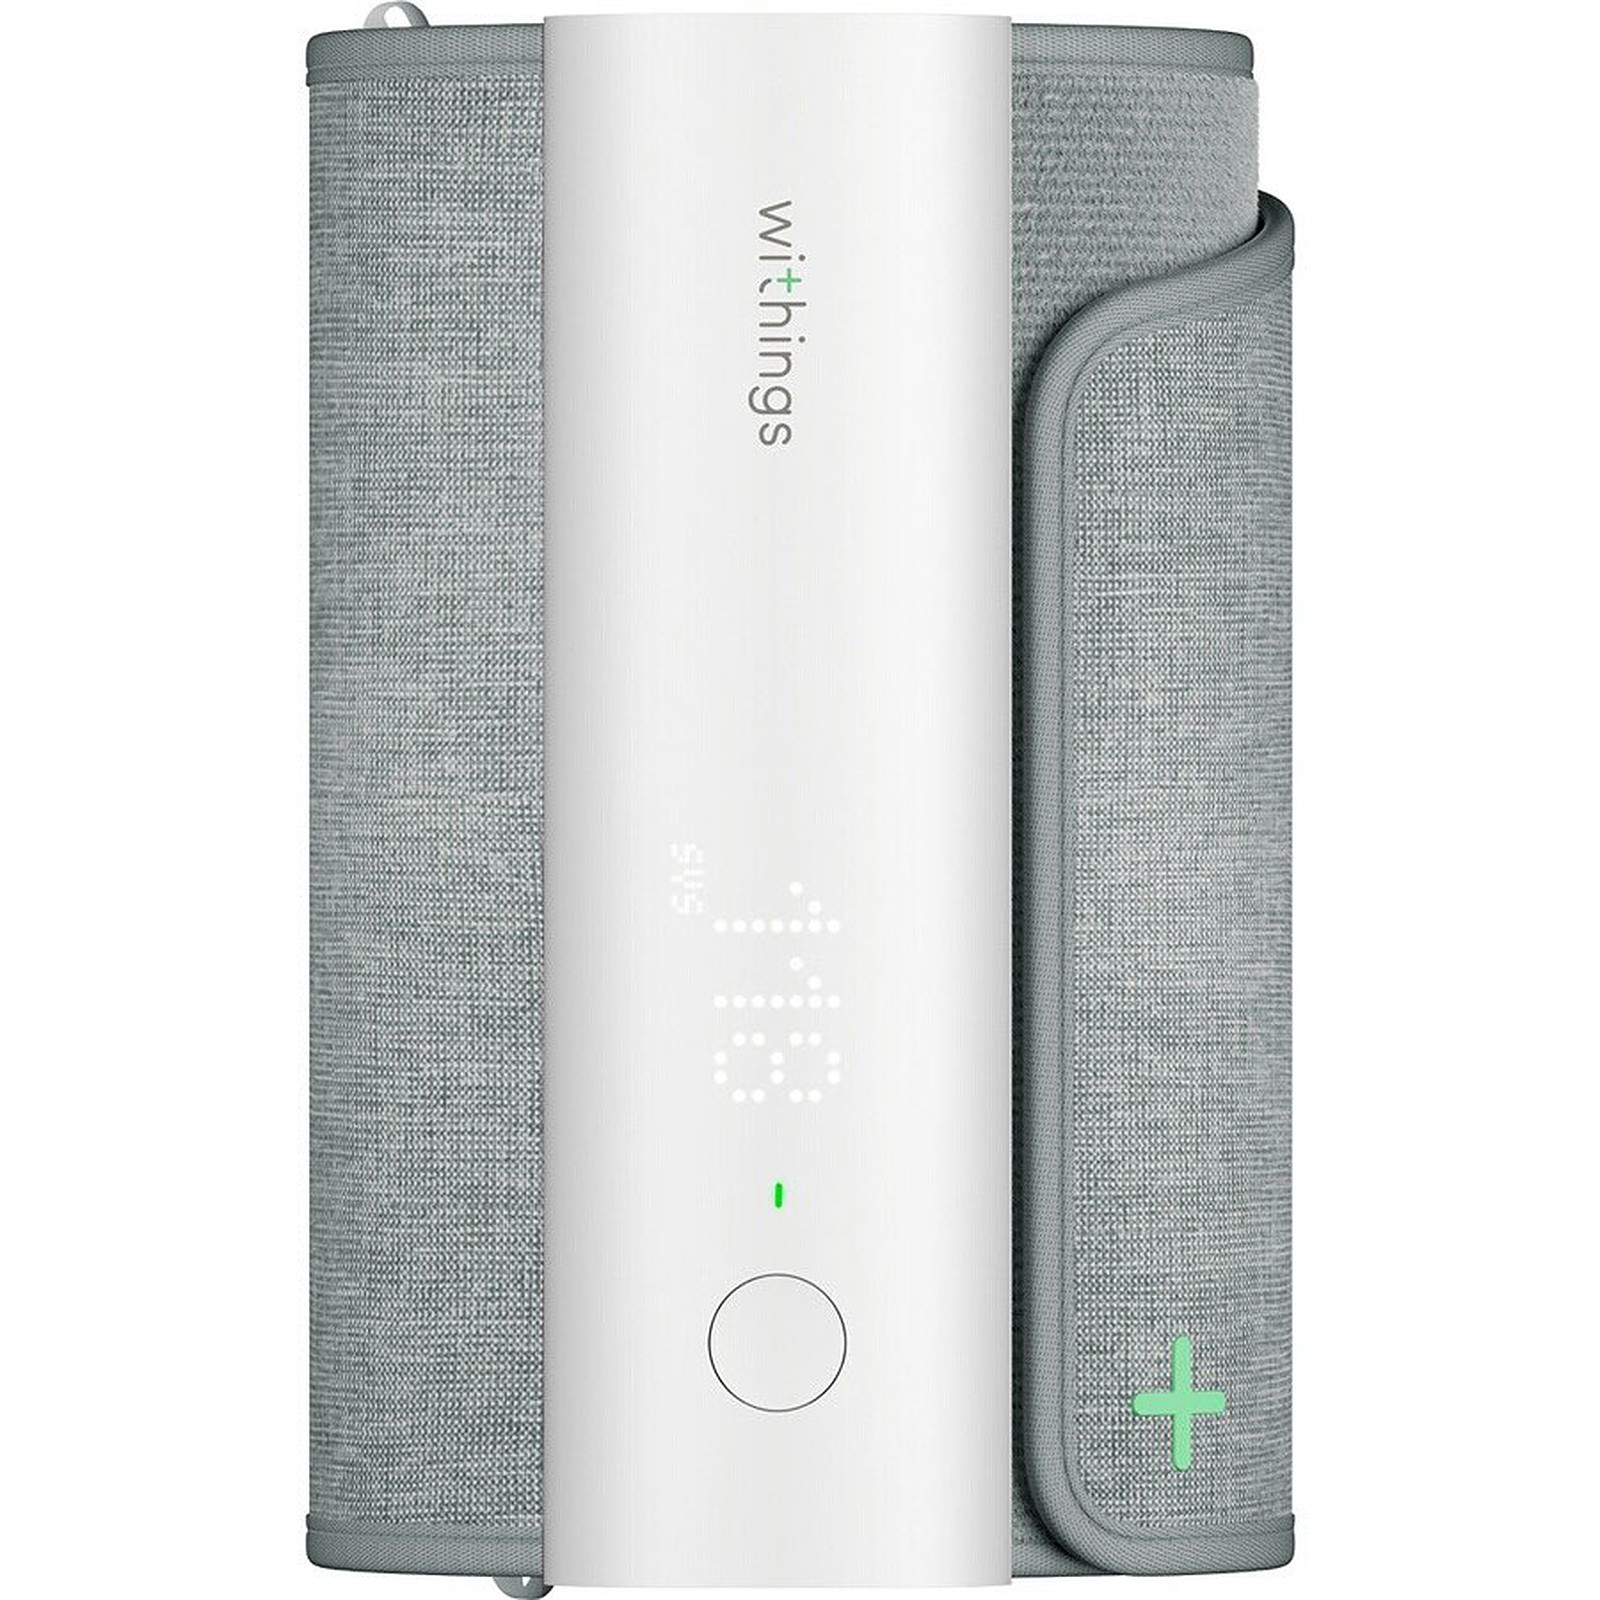 فشار سنج withings